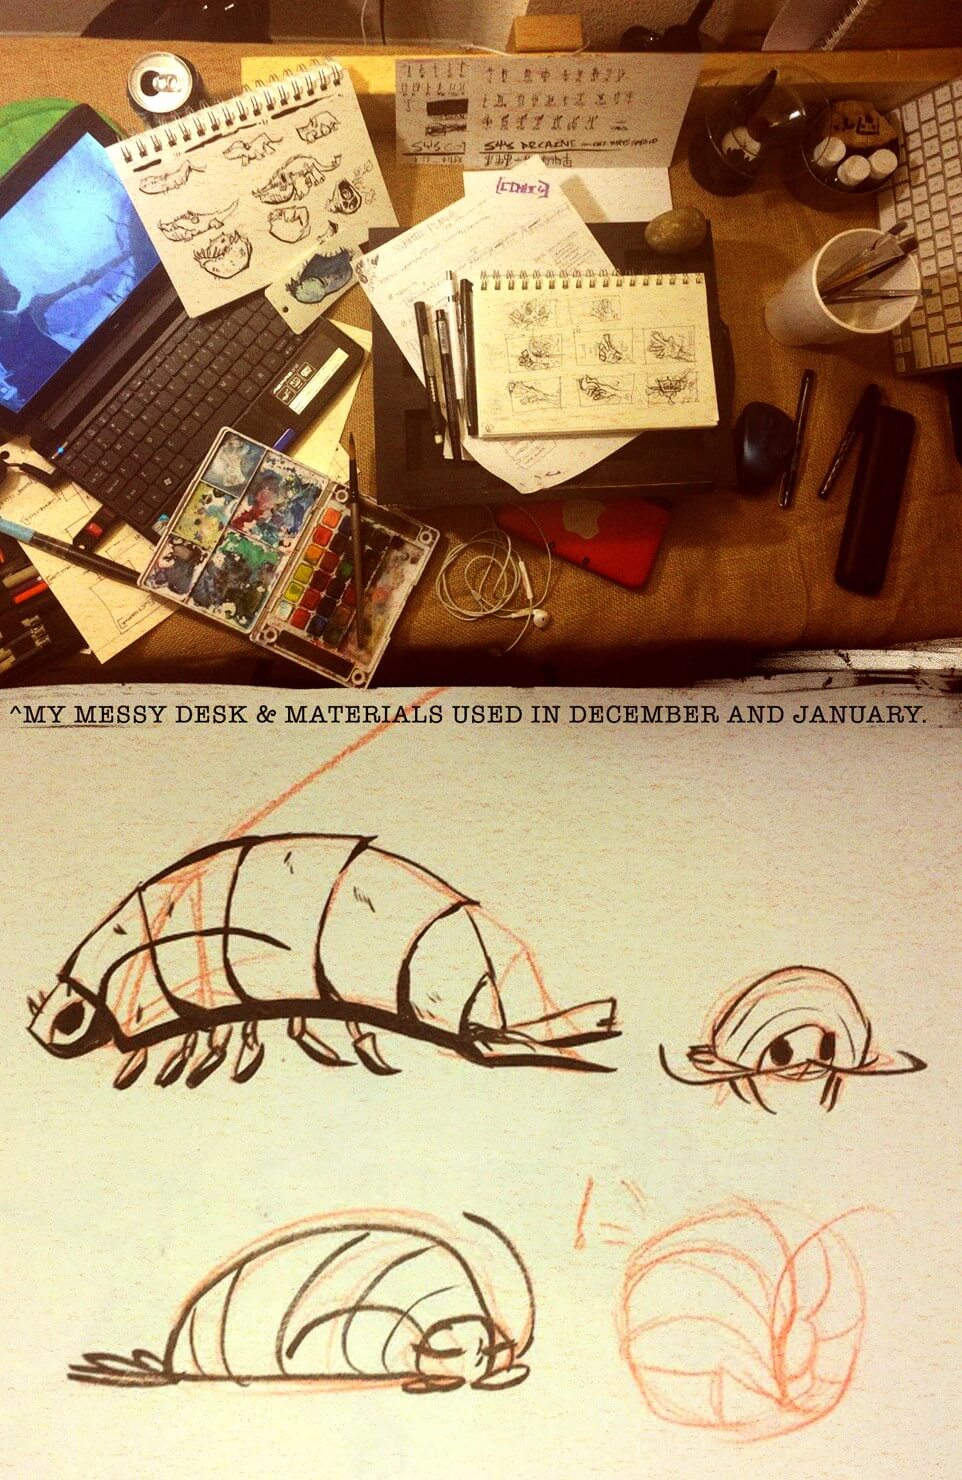 On the top is a photo of a messy desk, with various art tools and sketchbooks scattered about. The text reads "My messy desk & materials used in December and January". On the bottom are various sketches of isopods at various angles.